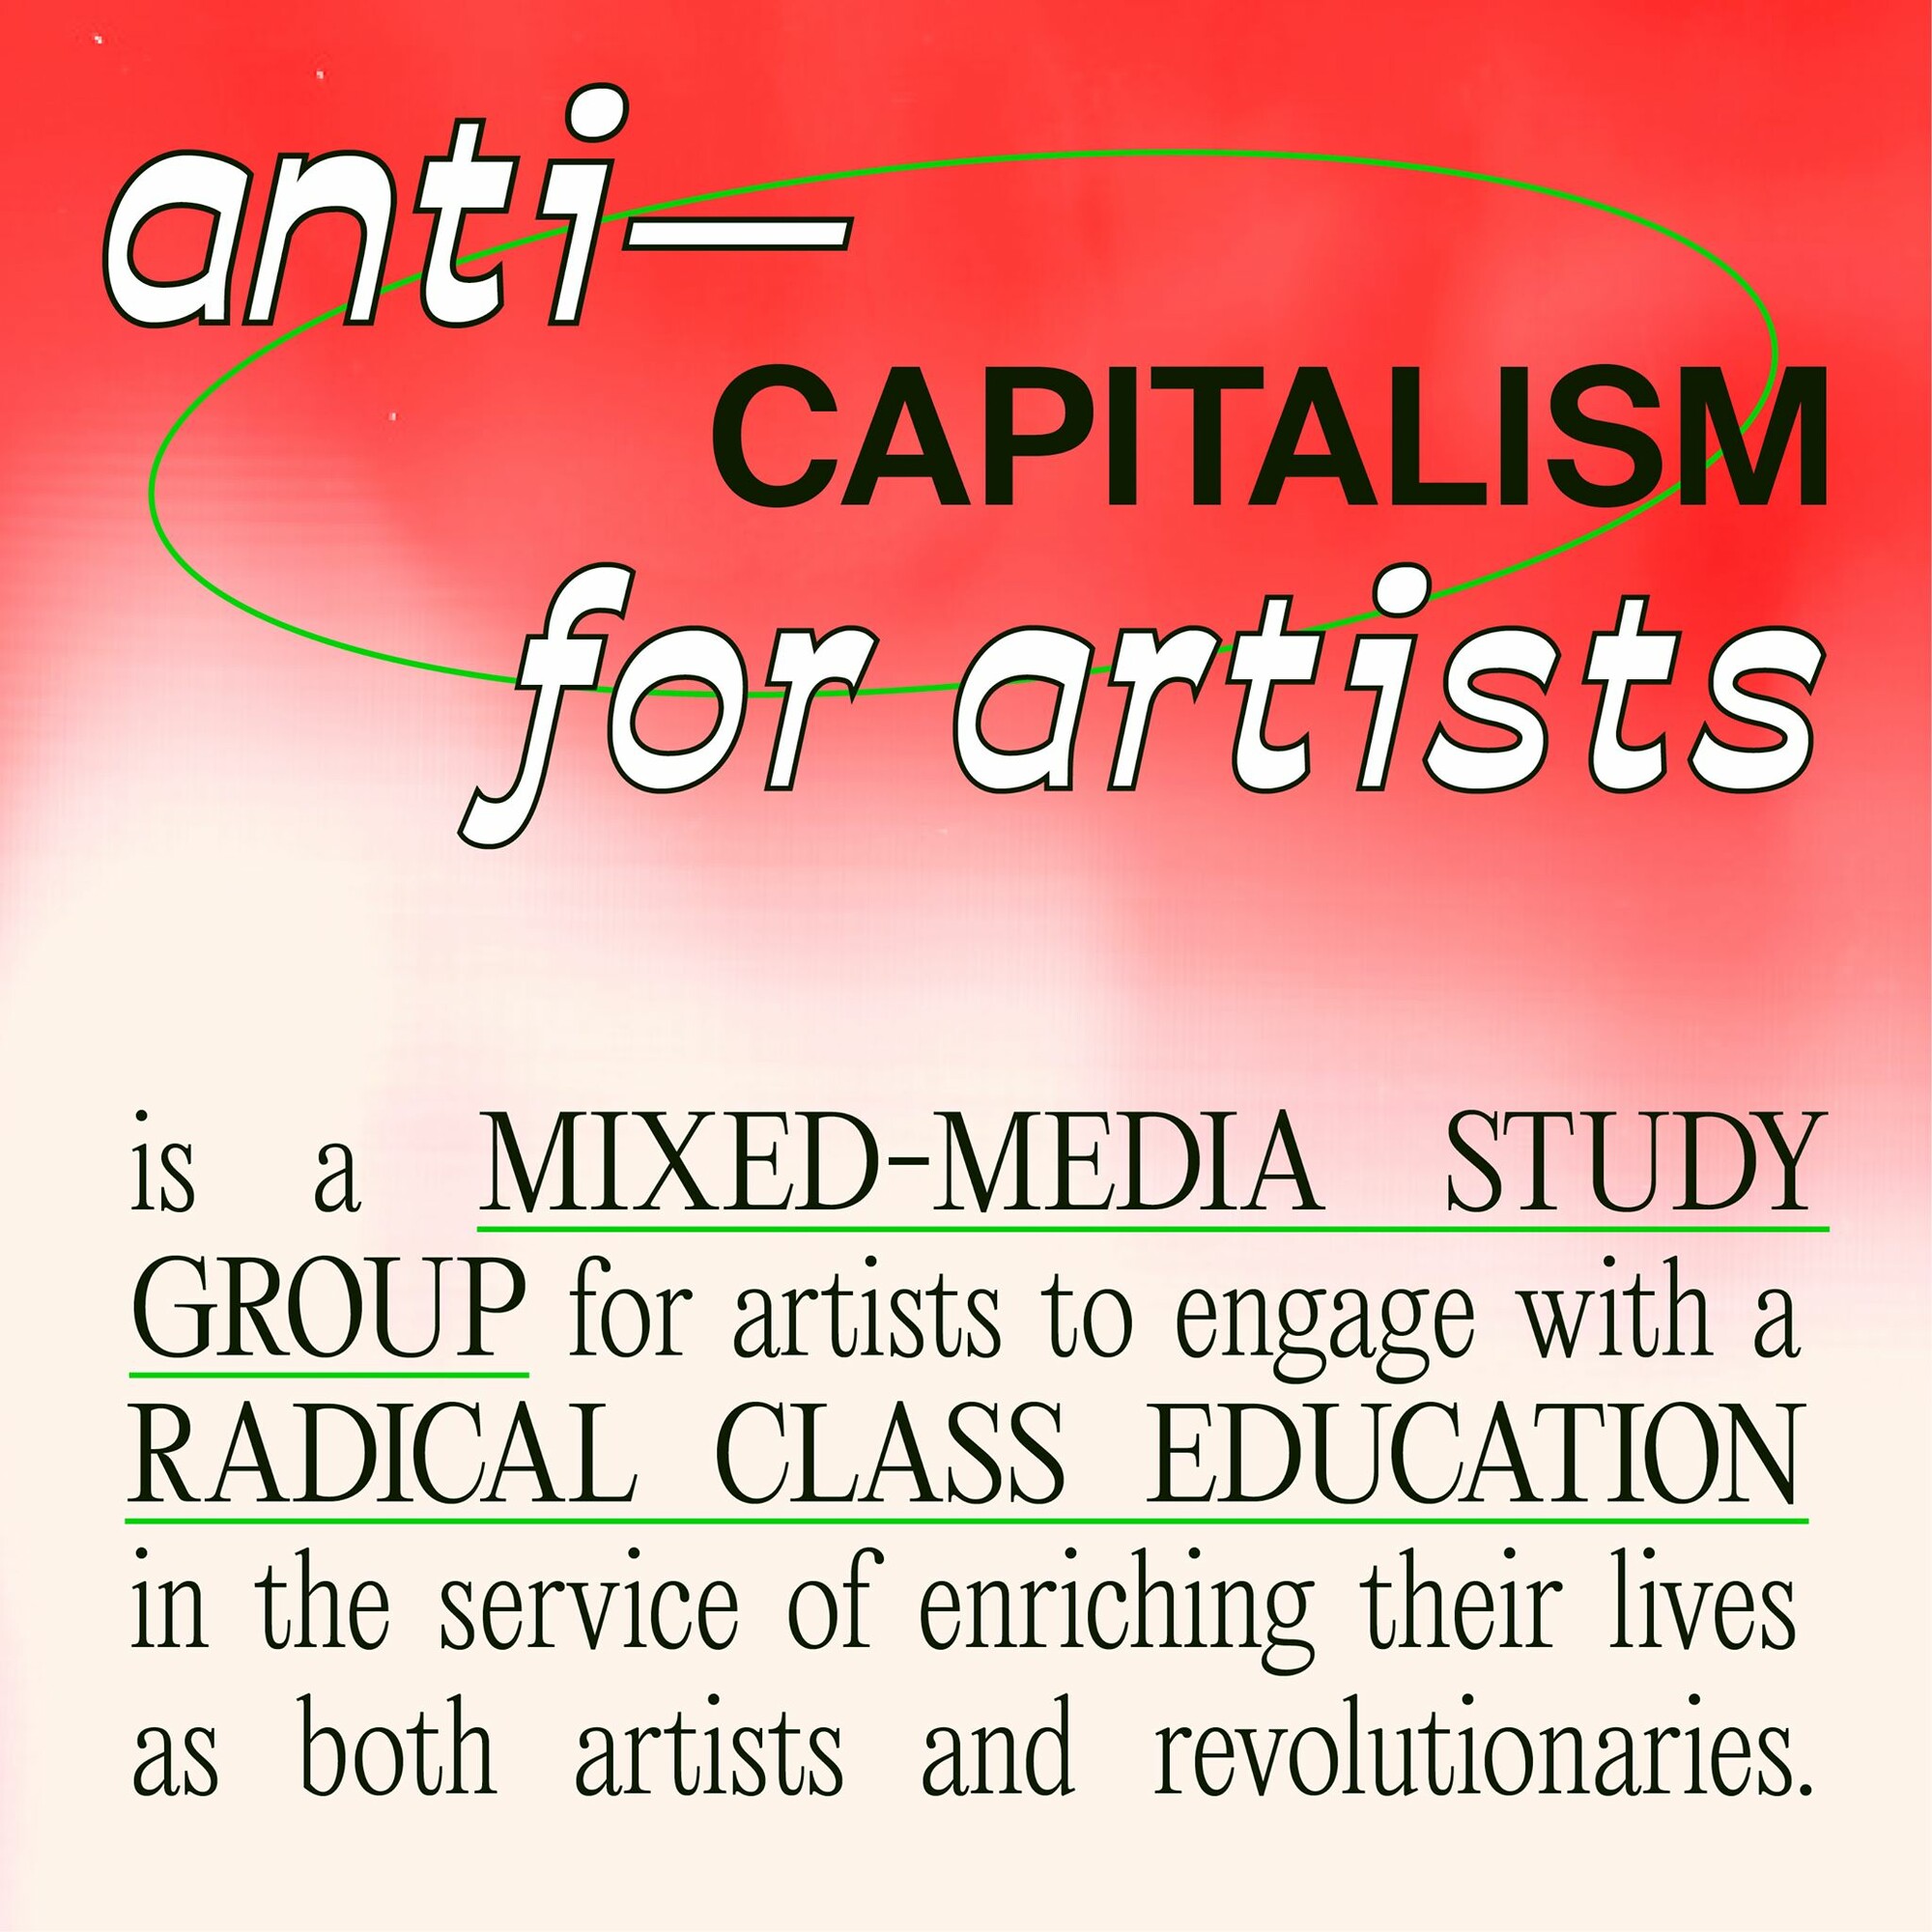 "Anti-capitalism for artists is a mixed-media study group for artists to engage with a radical class education in the service of enriching their lives as both artists and revolutionaries."